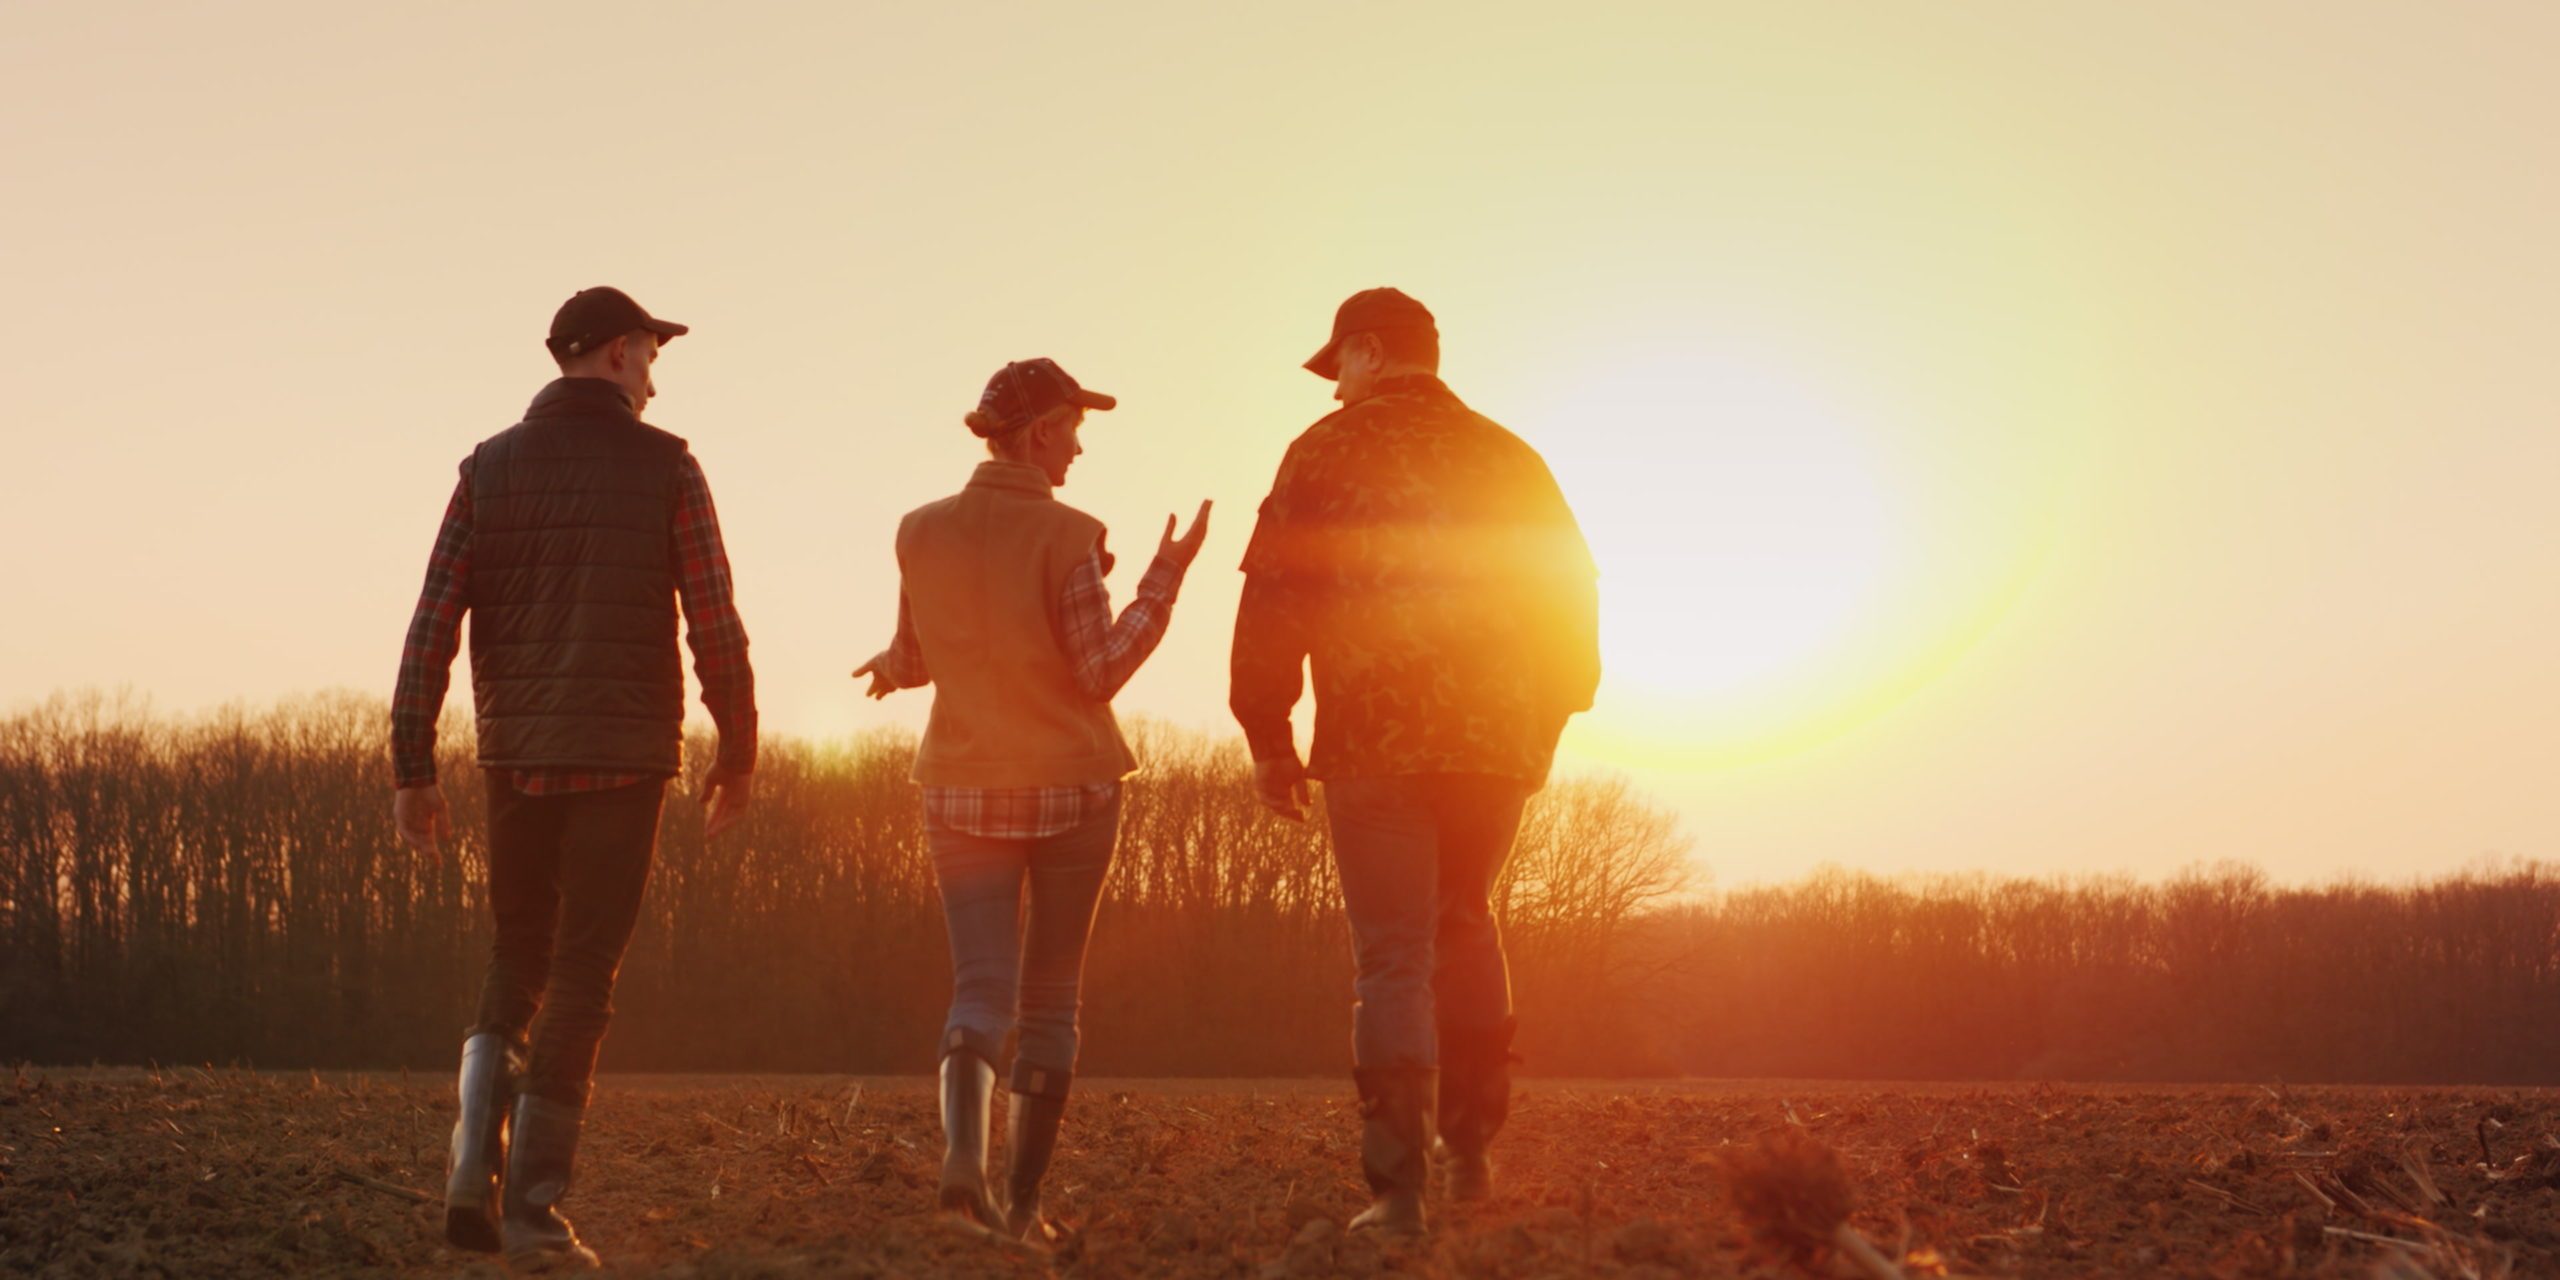 Three farmers go ahead on a plowed field at sunset. Young team of farmers.